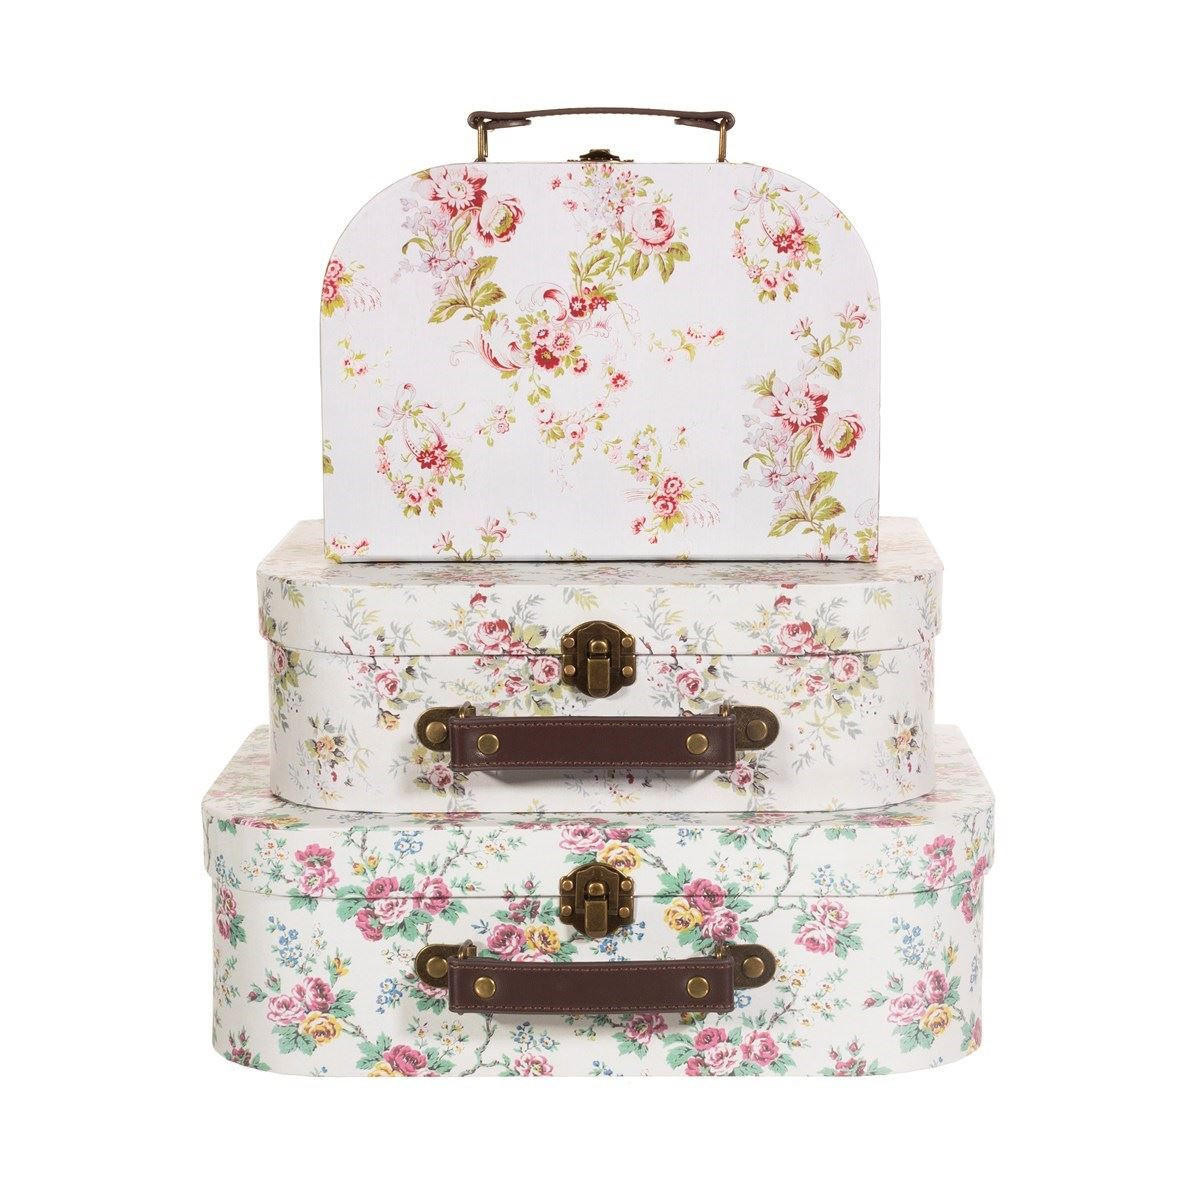 Sass & Belle Wild Rose Suitcases - Set of 3